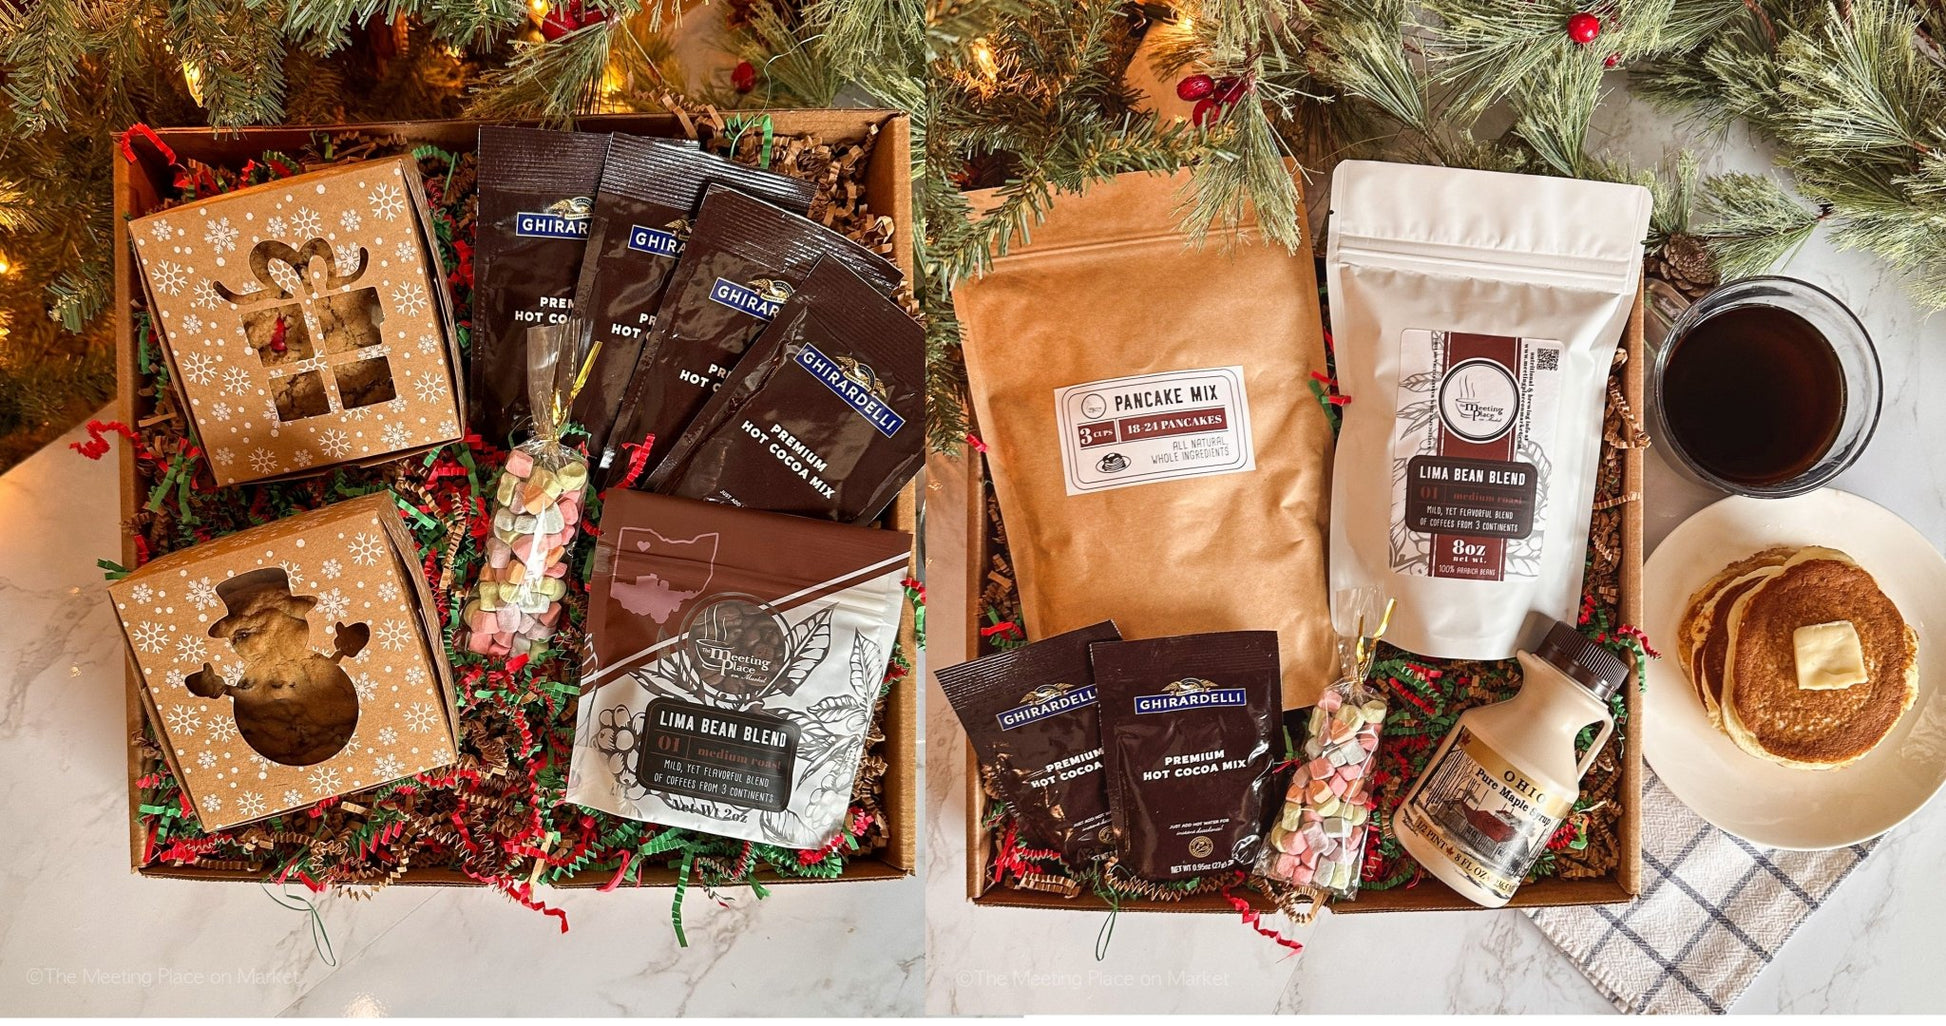 Coffee House Coffee Syrup Sampler Gift Set of 18